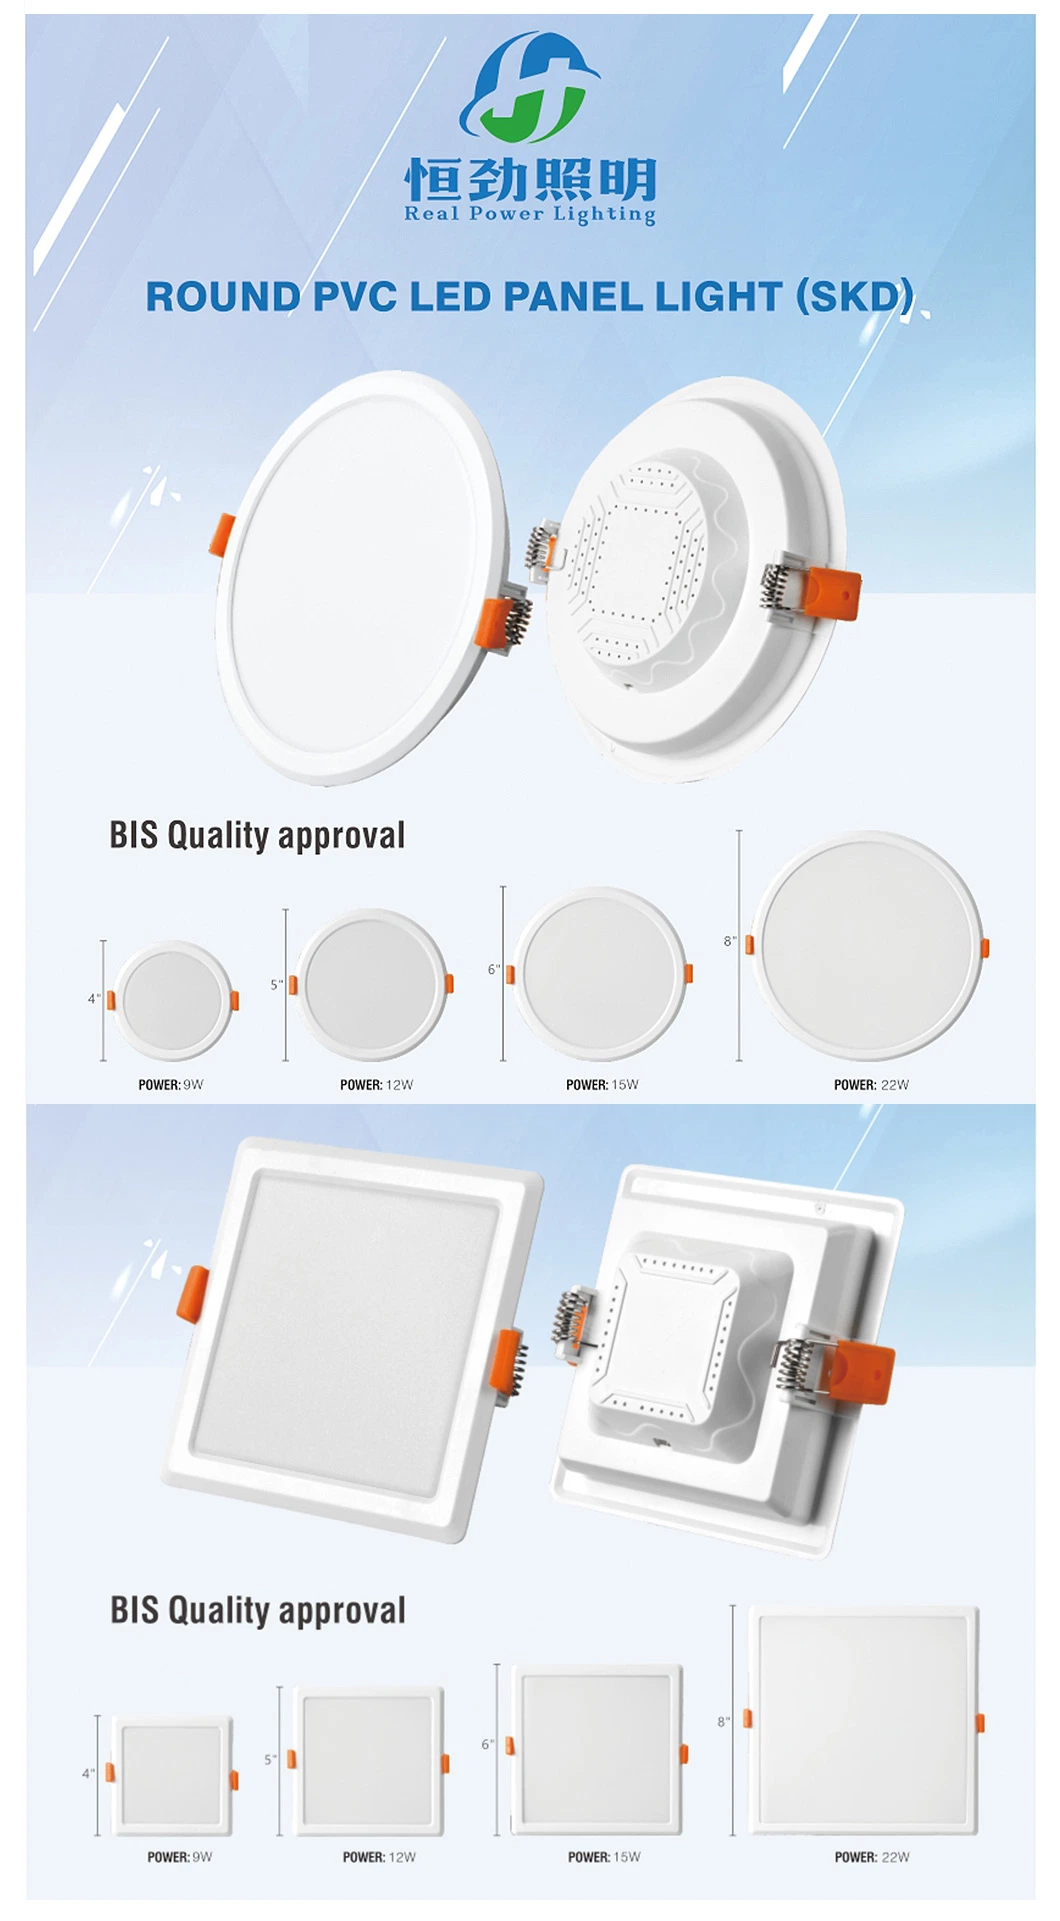 LED Round Panel Lamp 9W12W15W22W with Various Wattages to Choose From